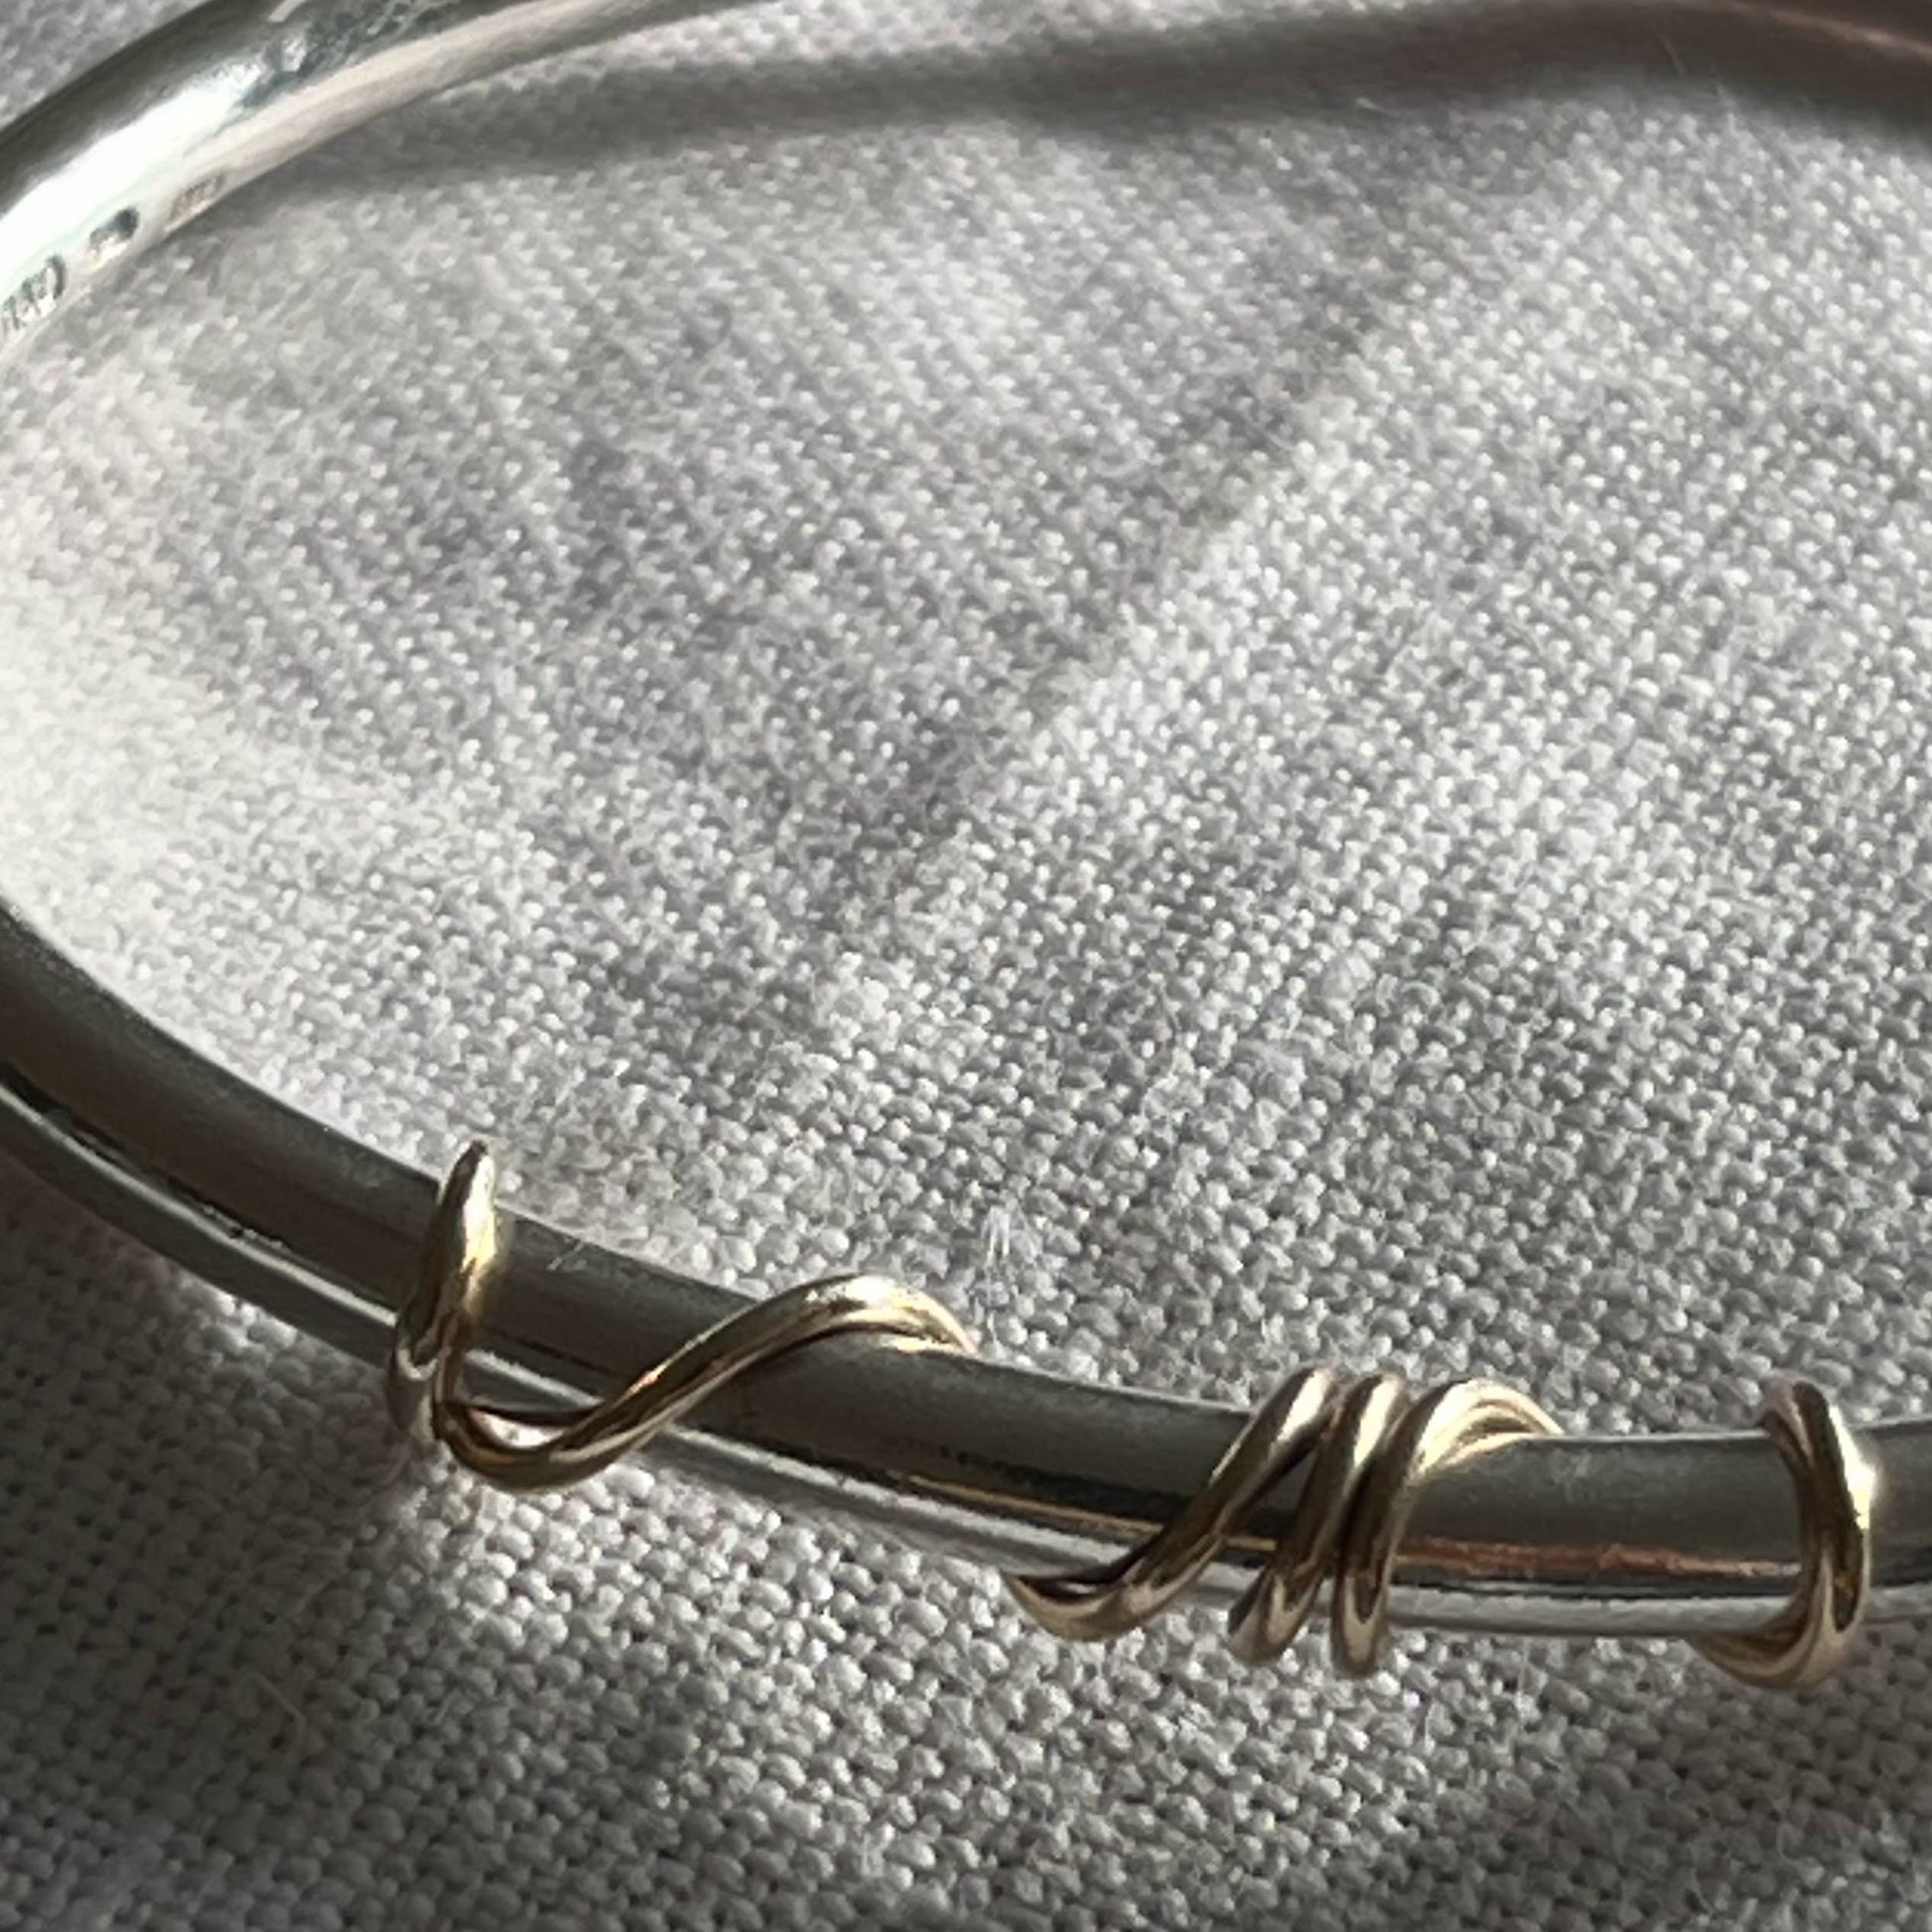 close up of handmade sterling silver solid bangle with 9ct gold wrap of wire twisted around the front of the bangle